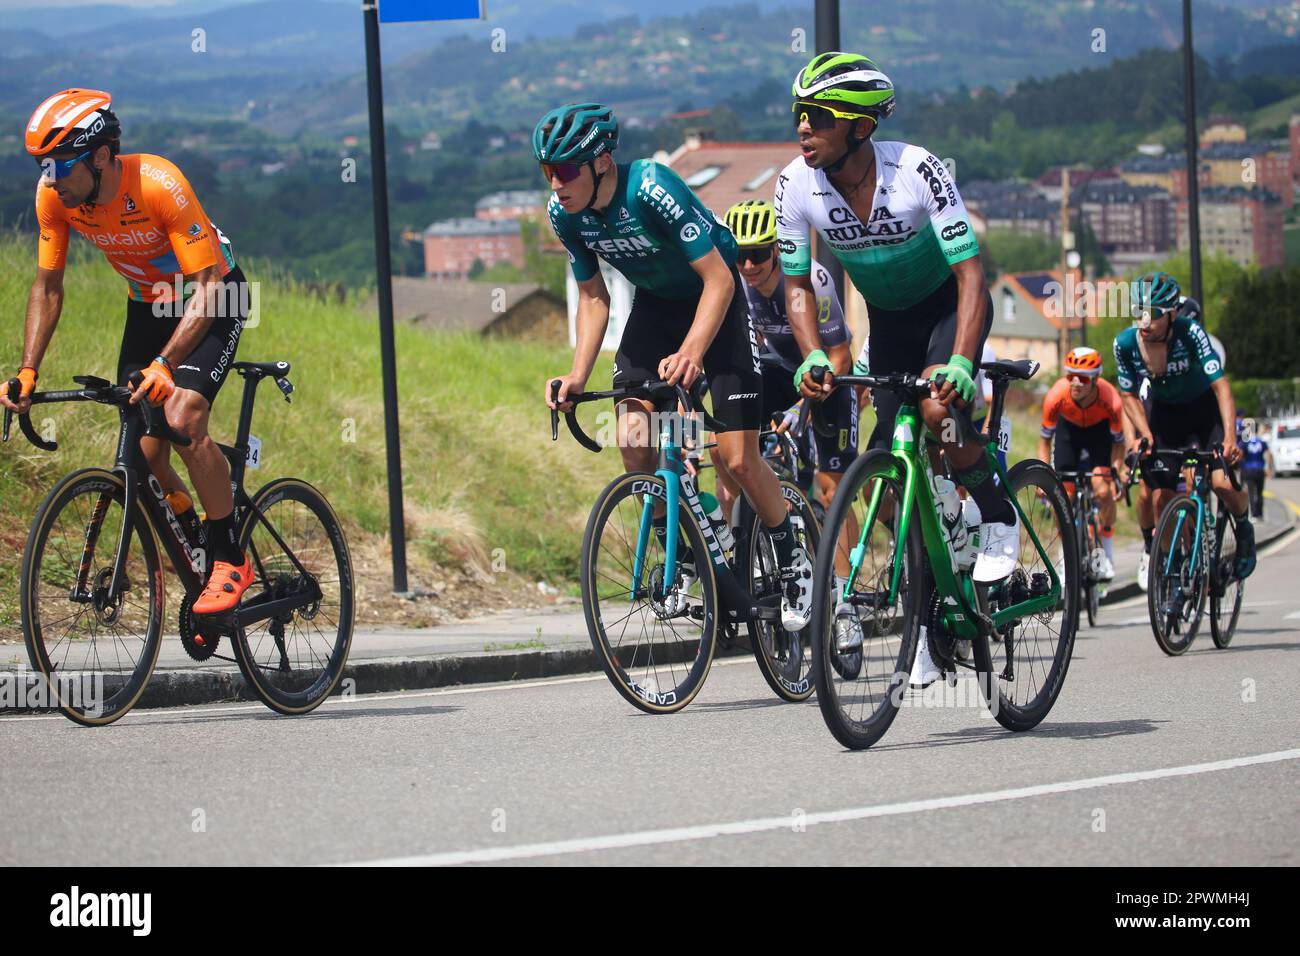 Oviedo, Spain. 30th Apr, 2023. The escape led by Luis Angel Mate (Euskaltel - Euskadi, L), Jon Agirre (Kern Pharma Team) and Mulu Kinfe Hailemichael (Caja Rural - Seguros RGA, R) during the 3rd stage of the Vuelta a Asturias 2023 between Cangas del Narcea and Oviedo, on April 30, 2023, in Oviedo, Spain. (Photo by Alberto Brevers/Pacific Press) Credit: Pacific Press Media Production Corp./Alamy Live News Stock Photo